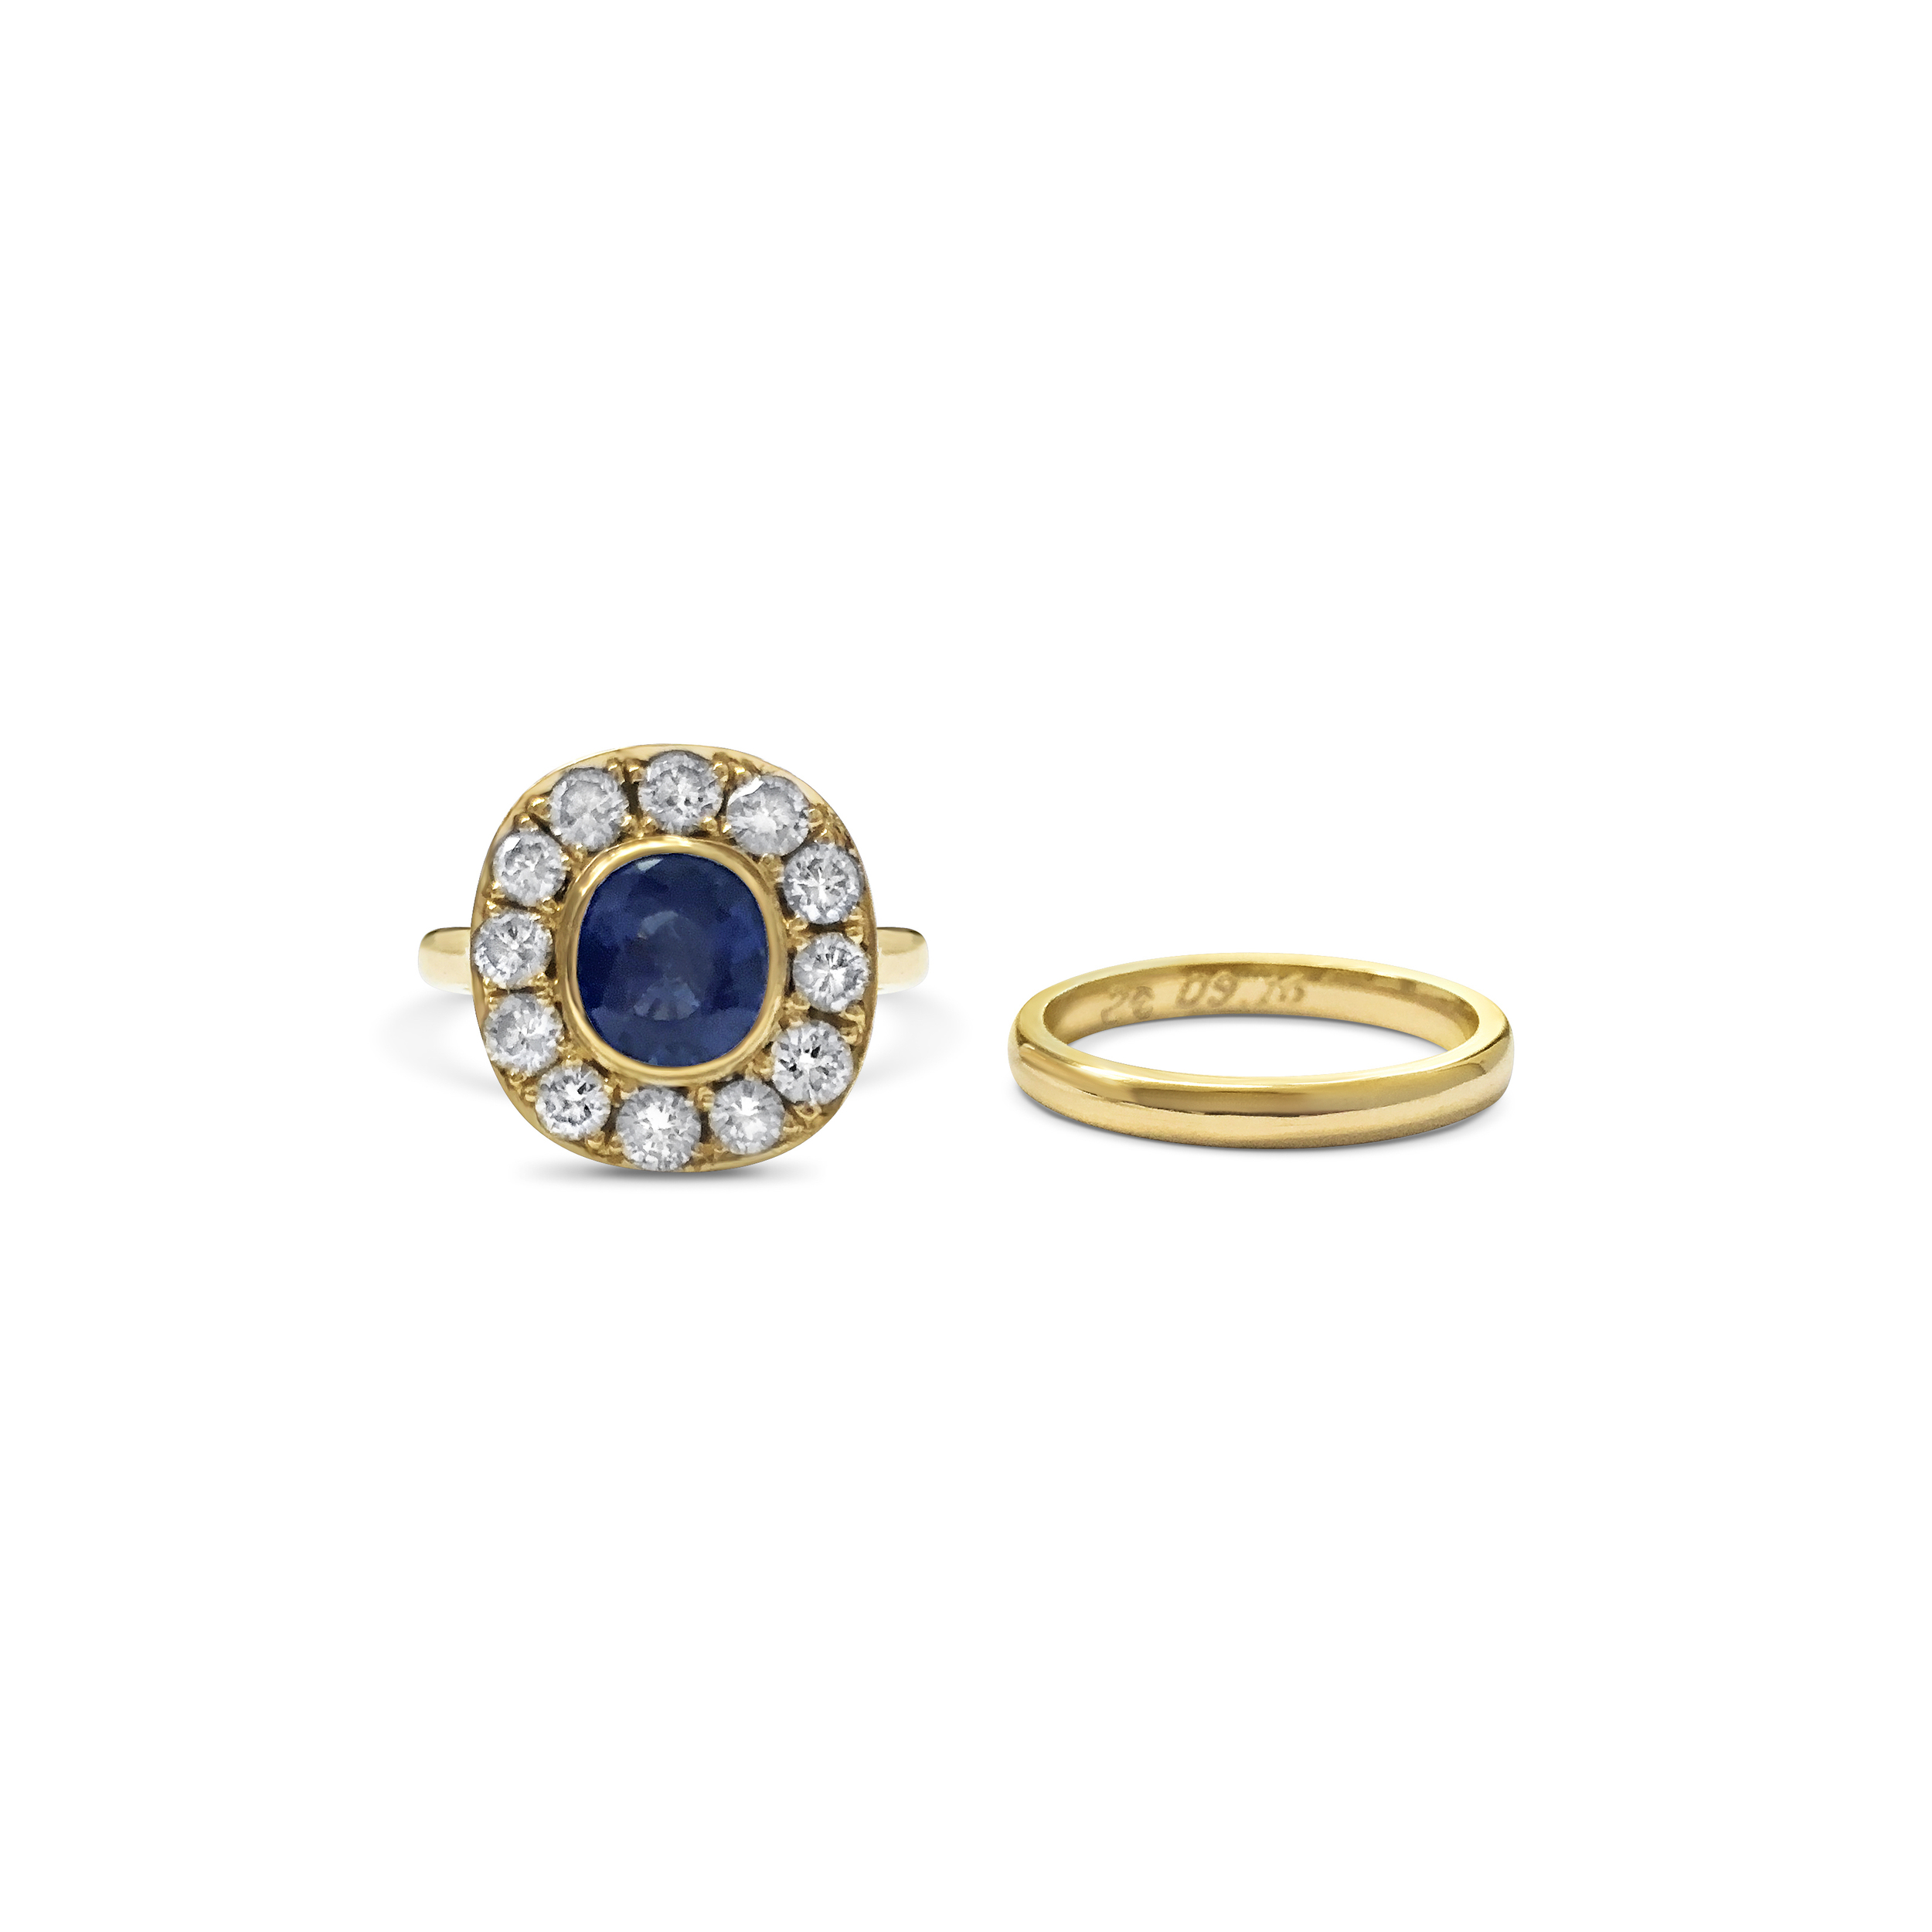 Sapphire-and-diamond-cluster-engagement-ring-in-yellow-gold-3.jpg